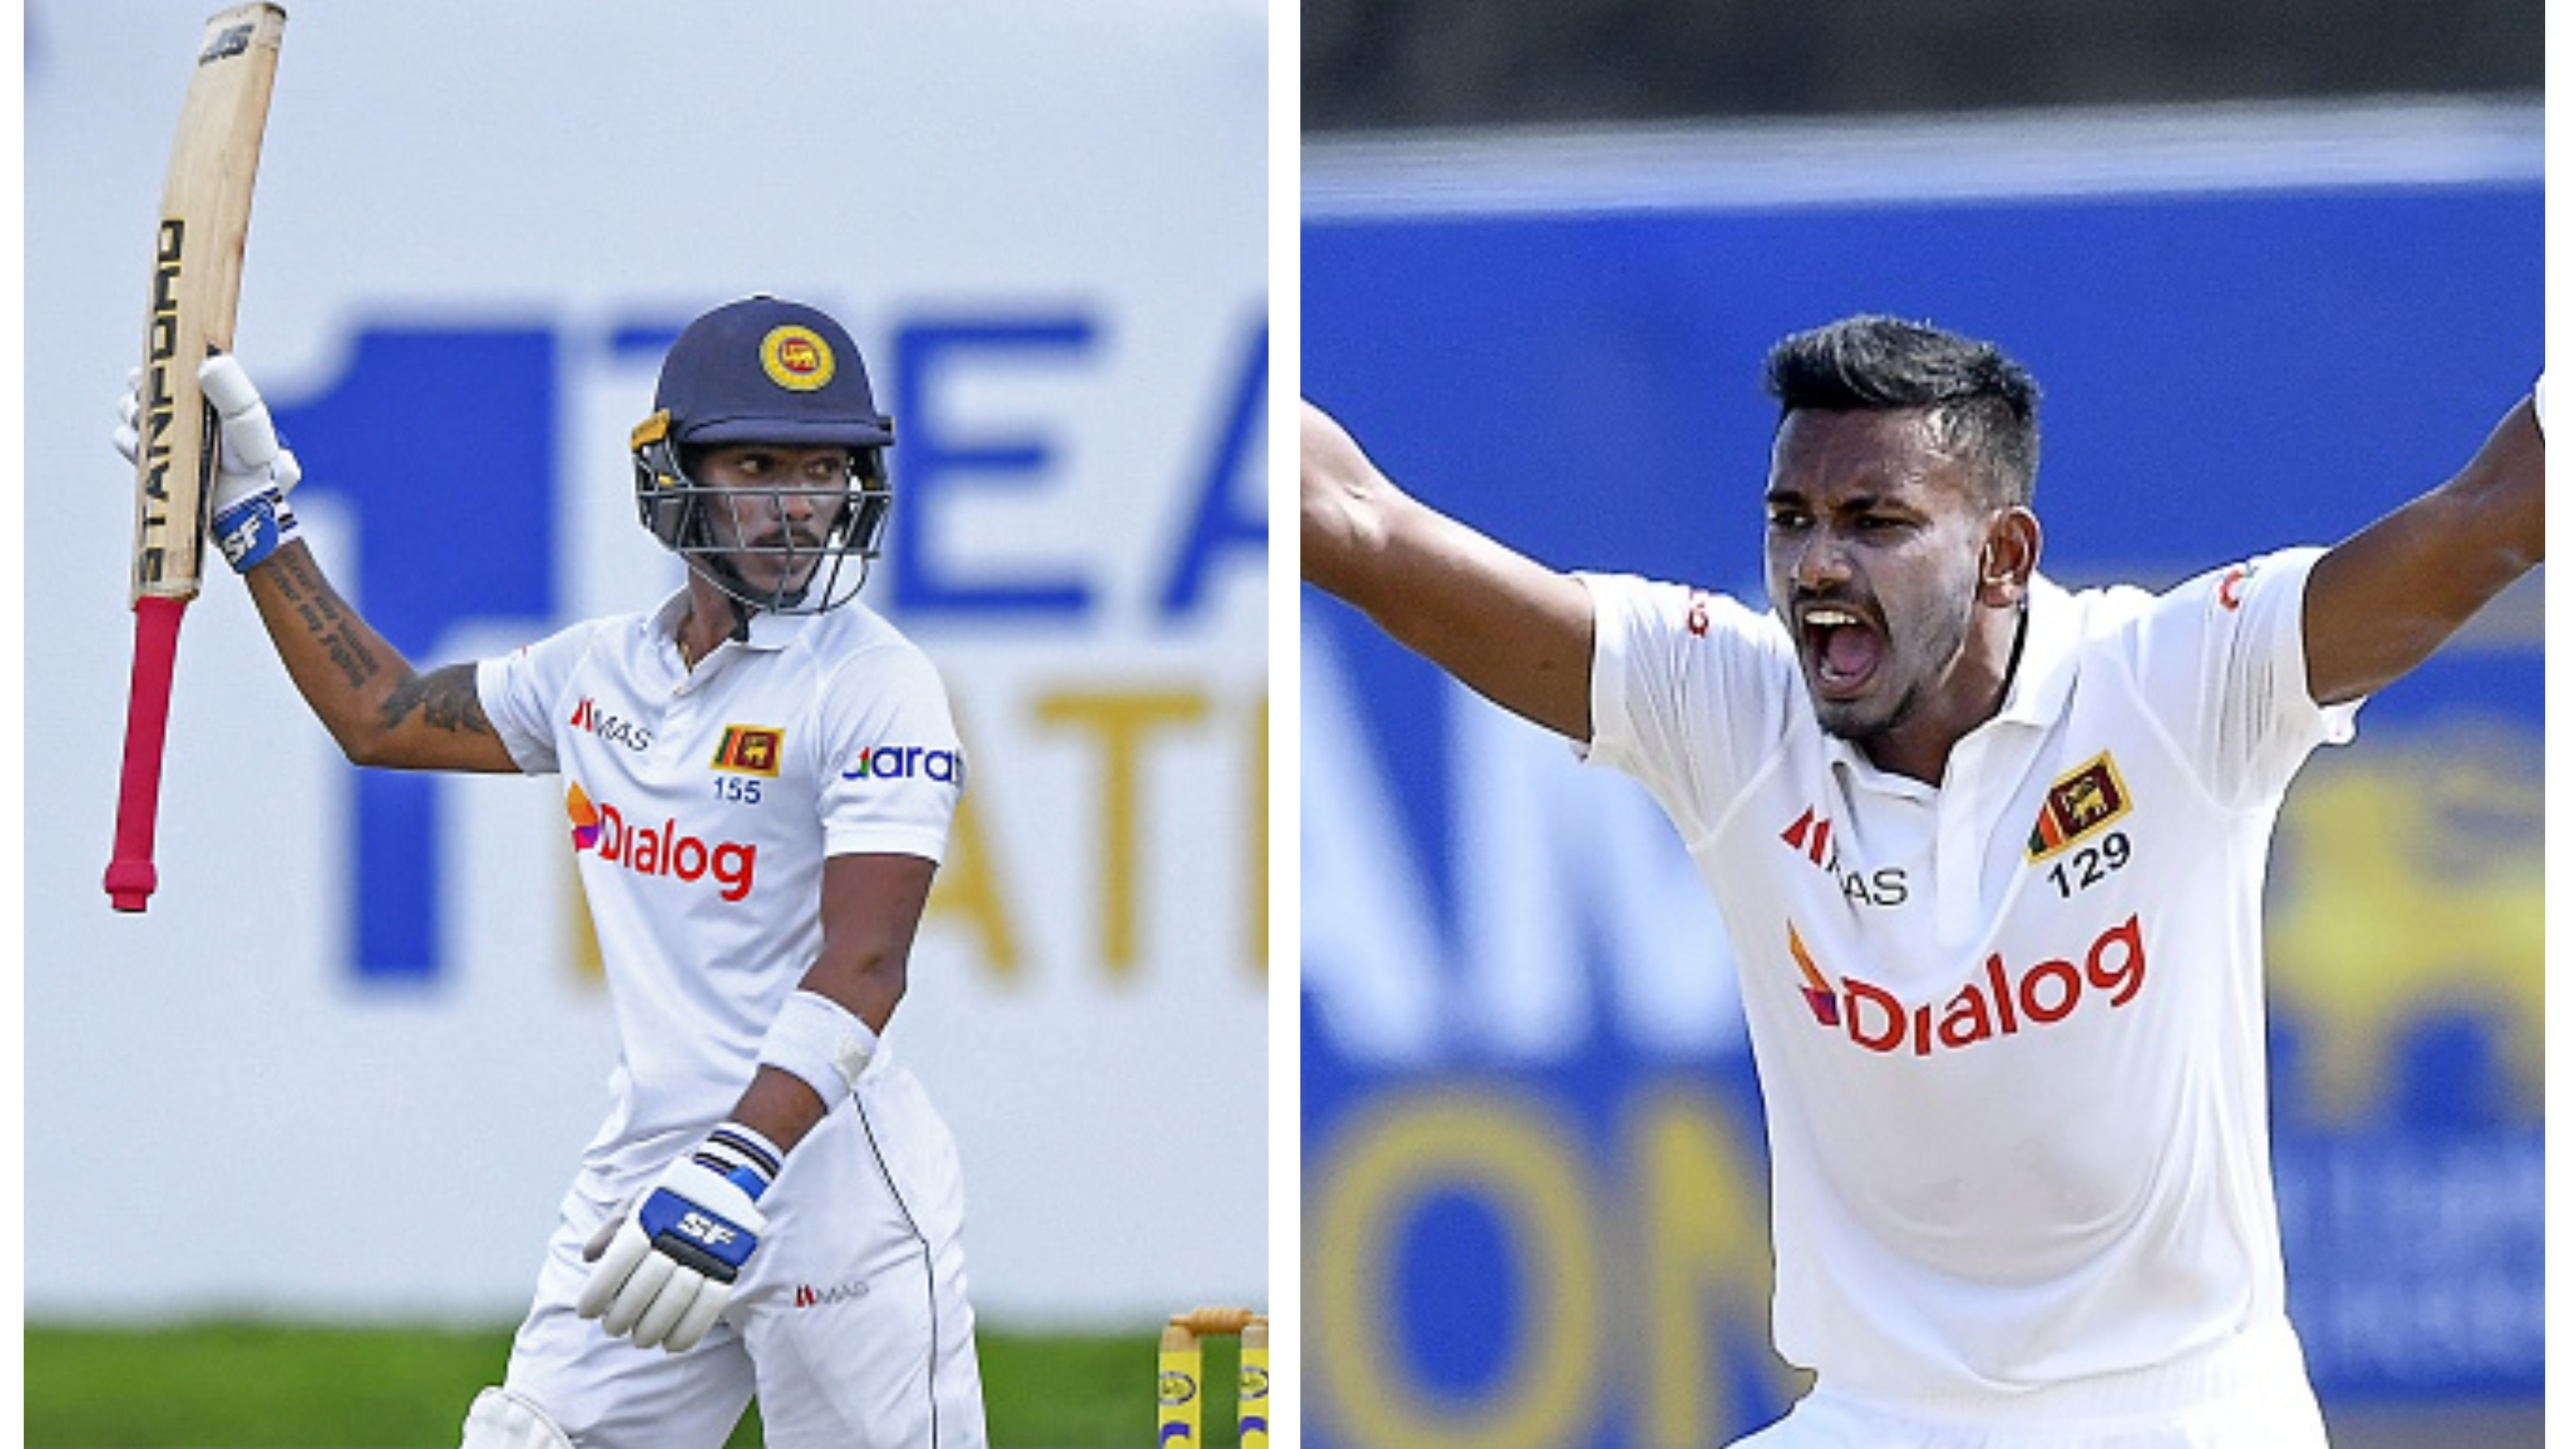 IND v SL 2022: Pathum Nissanka, Dushmantha Chameera ruled out of pink-ball Test with injuries